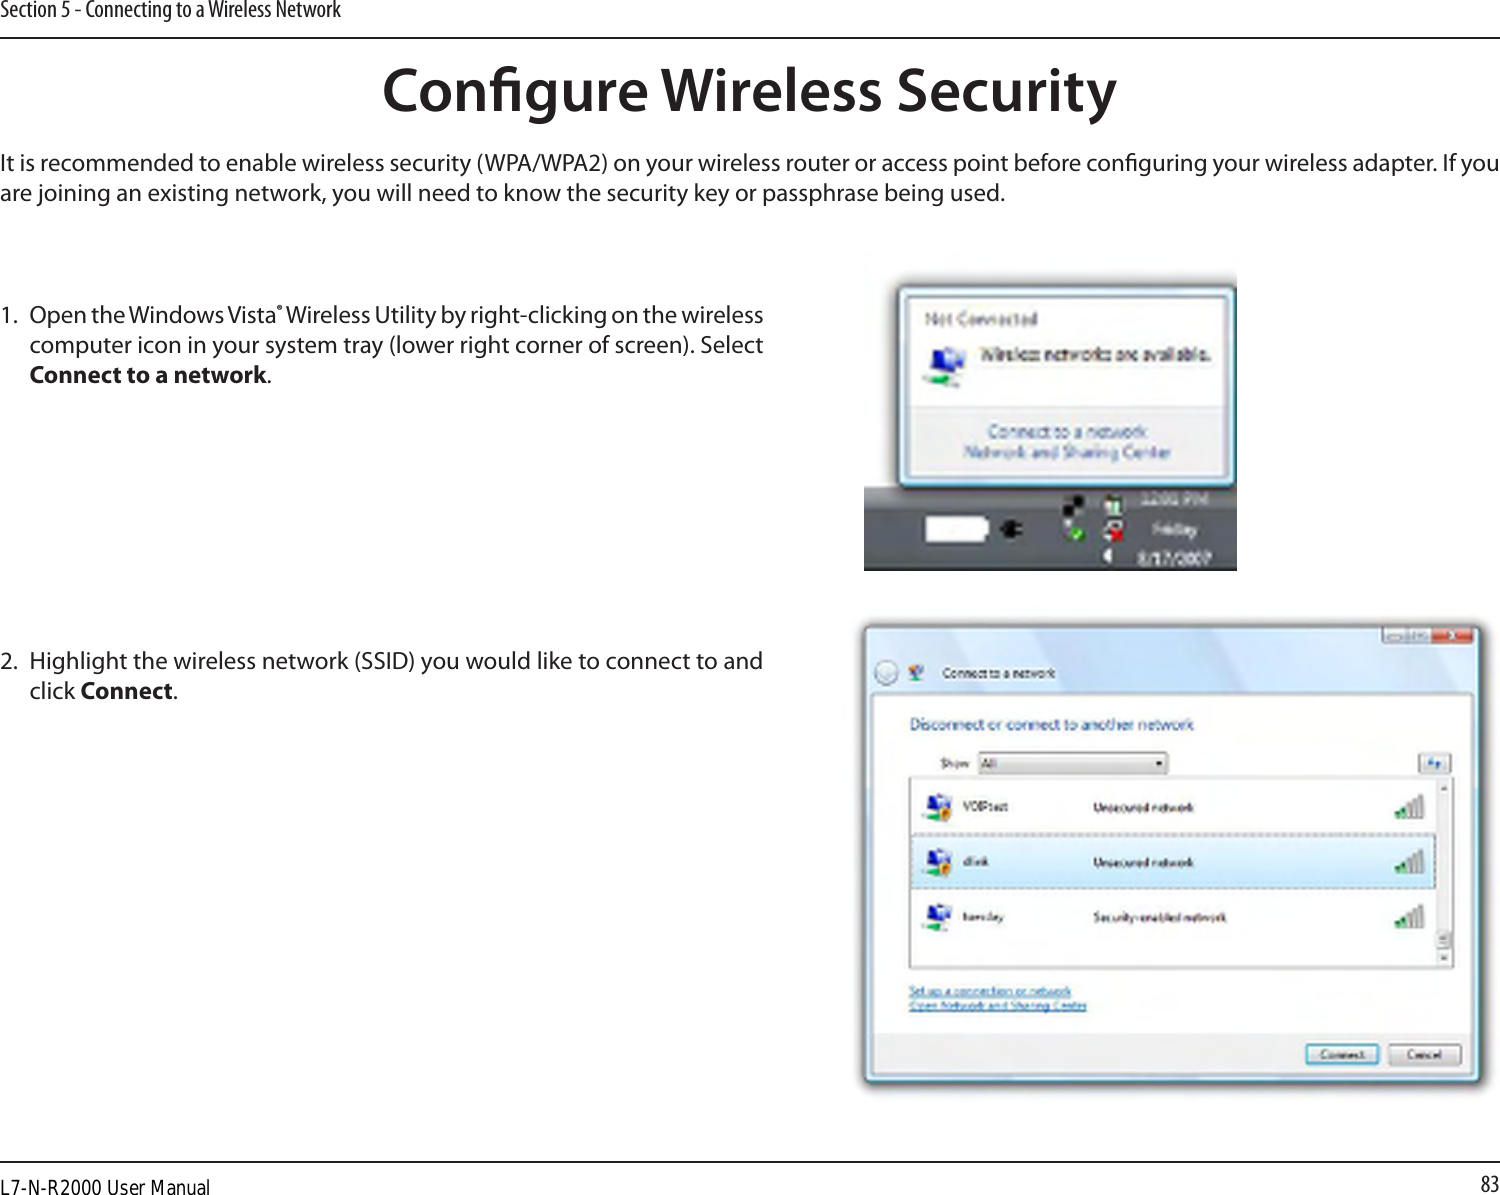 83Section 5 - Connecting to a Wireless NetworkCongure Wireless SecurityIt is recommended to enable wireless security (WPA/WPA2) on your wireless router or access point before conguring your wireless adapter. If you are joining an existing network, you will need to know the security key or passphrase being used.2. Highlight the wireless network (SSID) you would like to connect to and click Connect.1. Open the Windows Vista® Wireless Utility by right-clicking on the wireless computer icon in your system tray (lower right corner of screen). Select Connect to a network. L7-N-R2000 User Manual